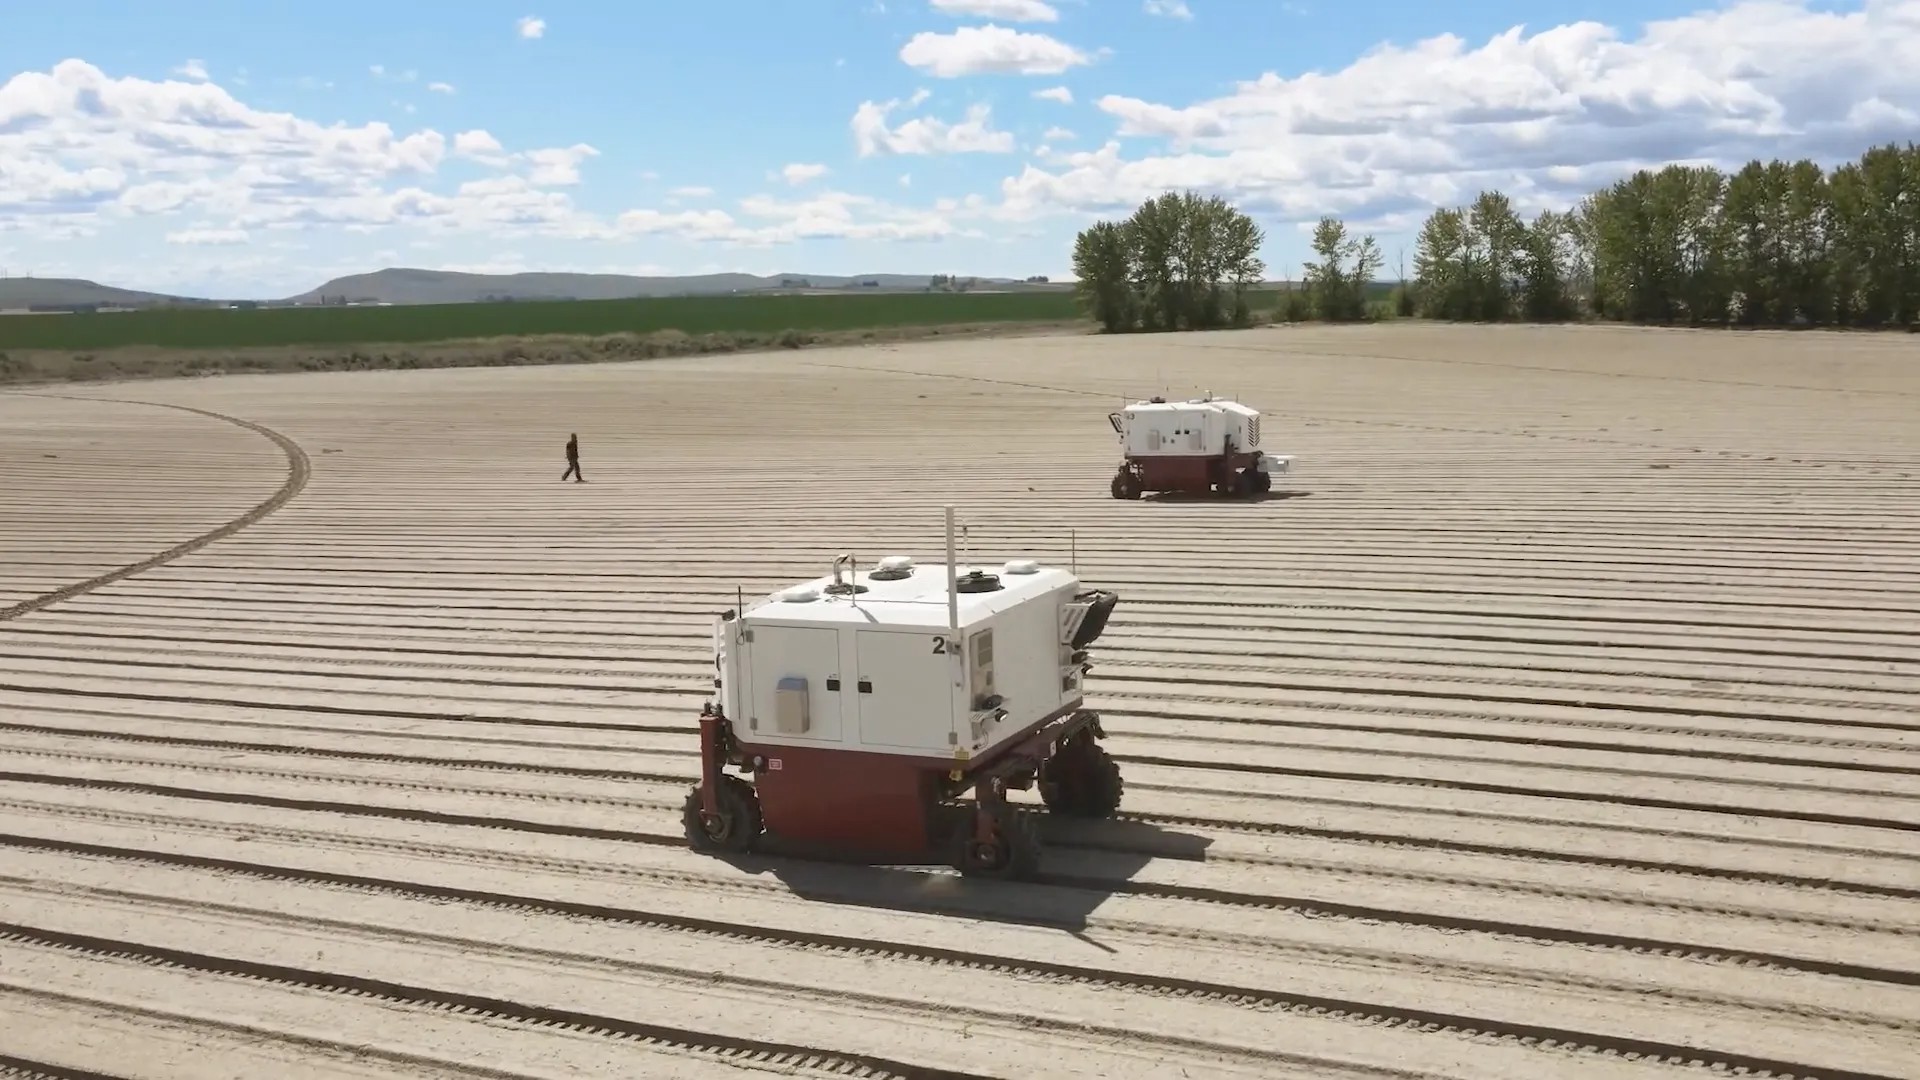 Two automated agricultural vehicles working in a large, flat, evenly plowed field with a person walking in the background. Sparse tree line and hill visible under a partly cloudy sky.